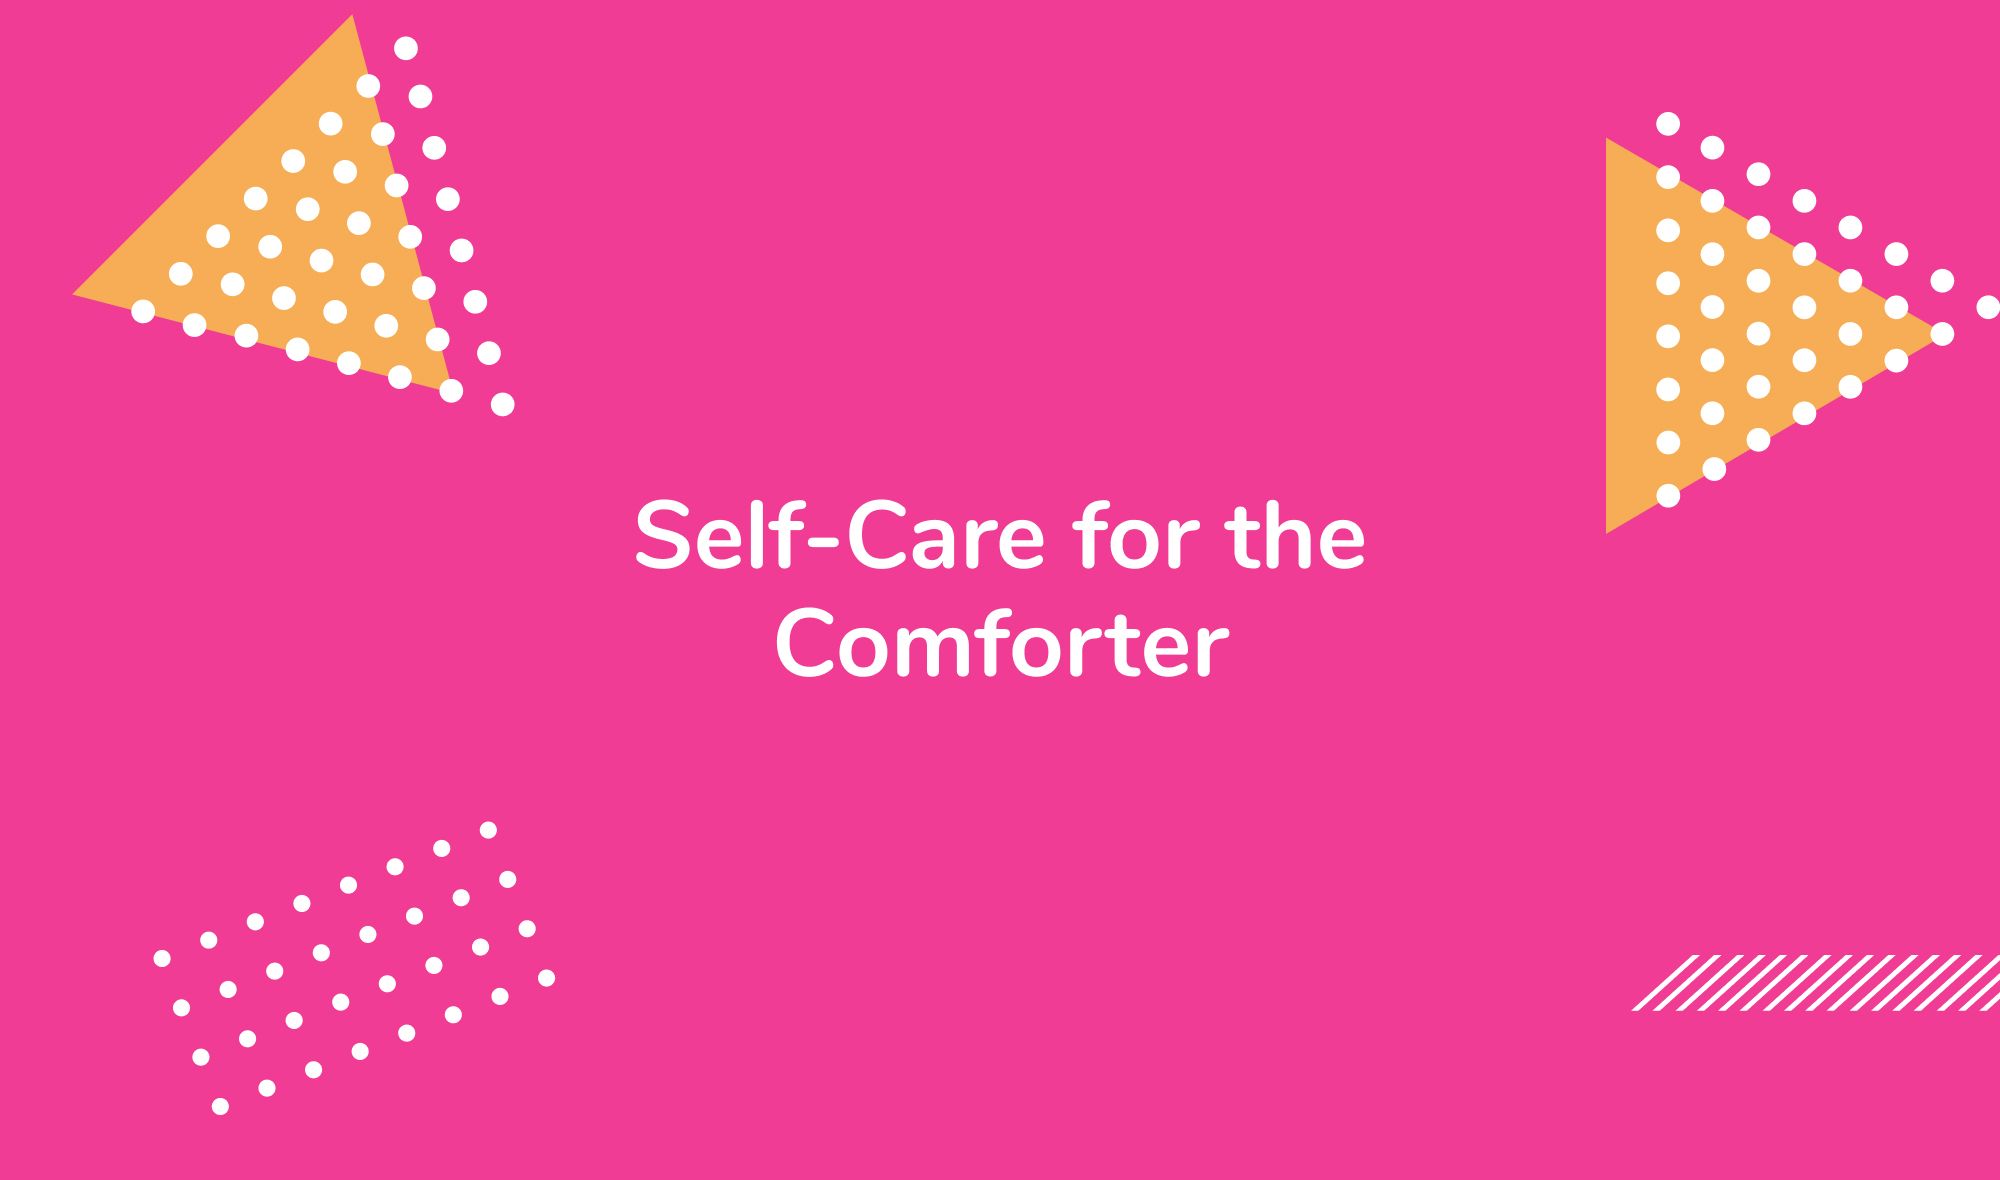 Self-Care for the Comforter